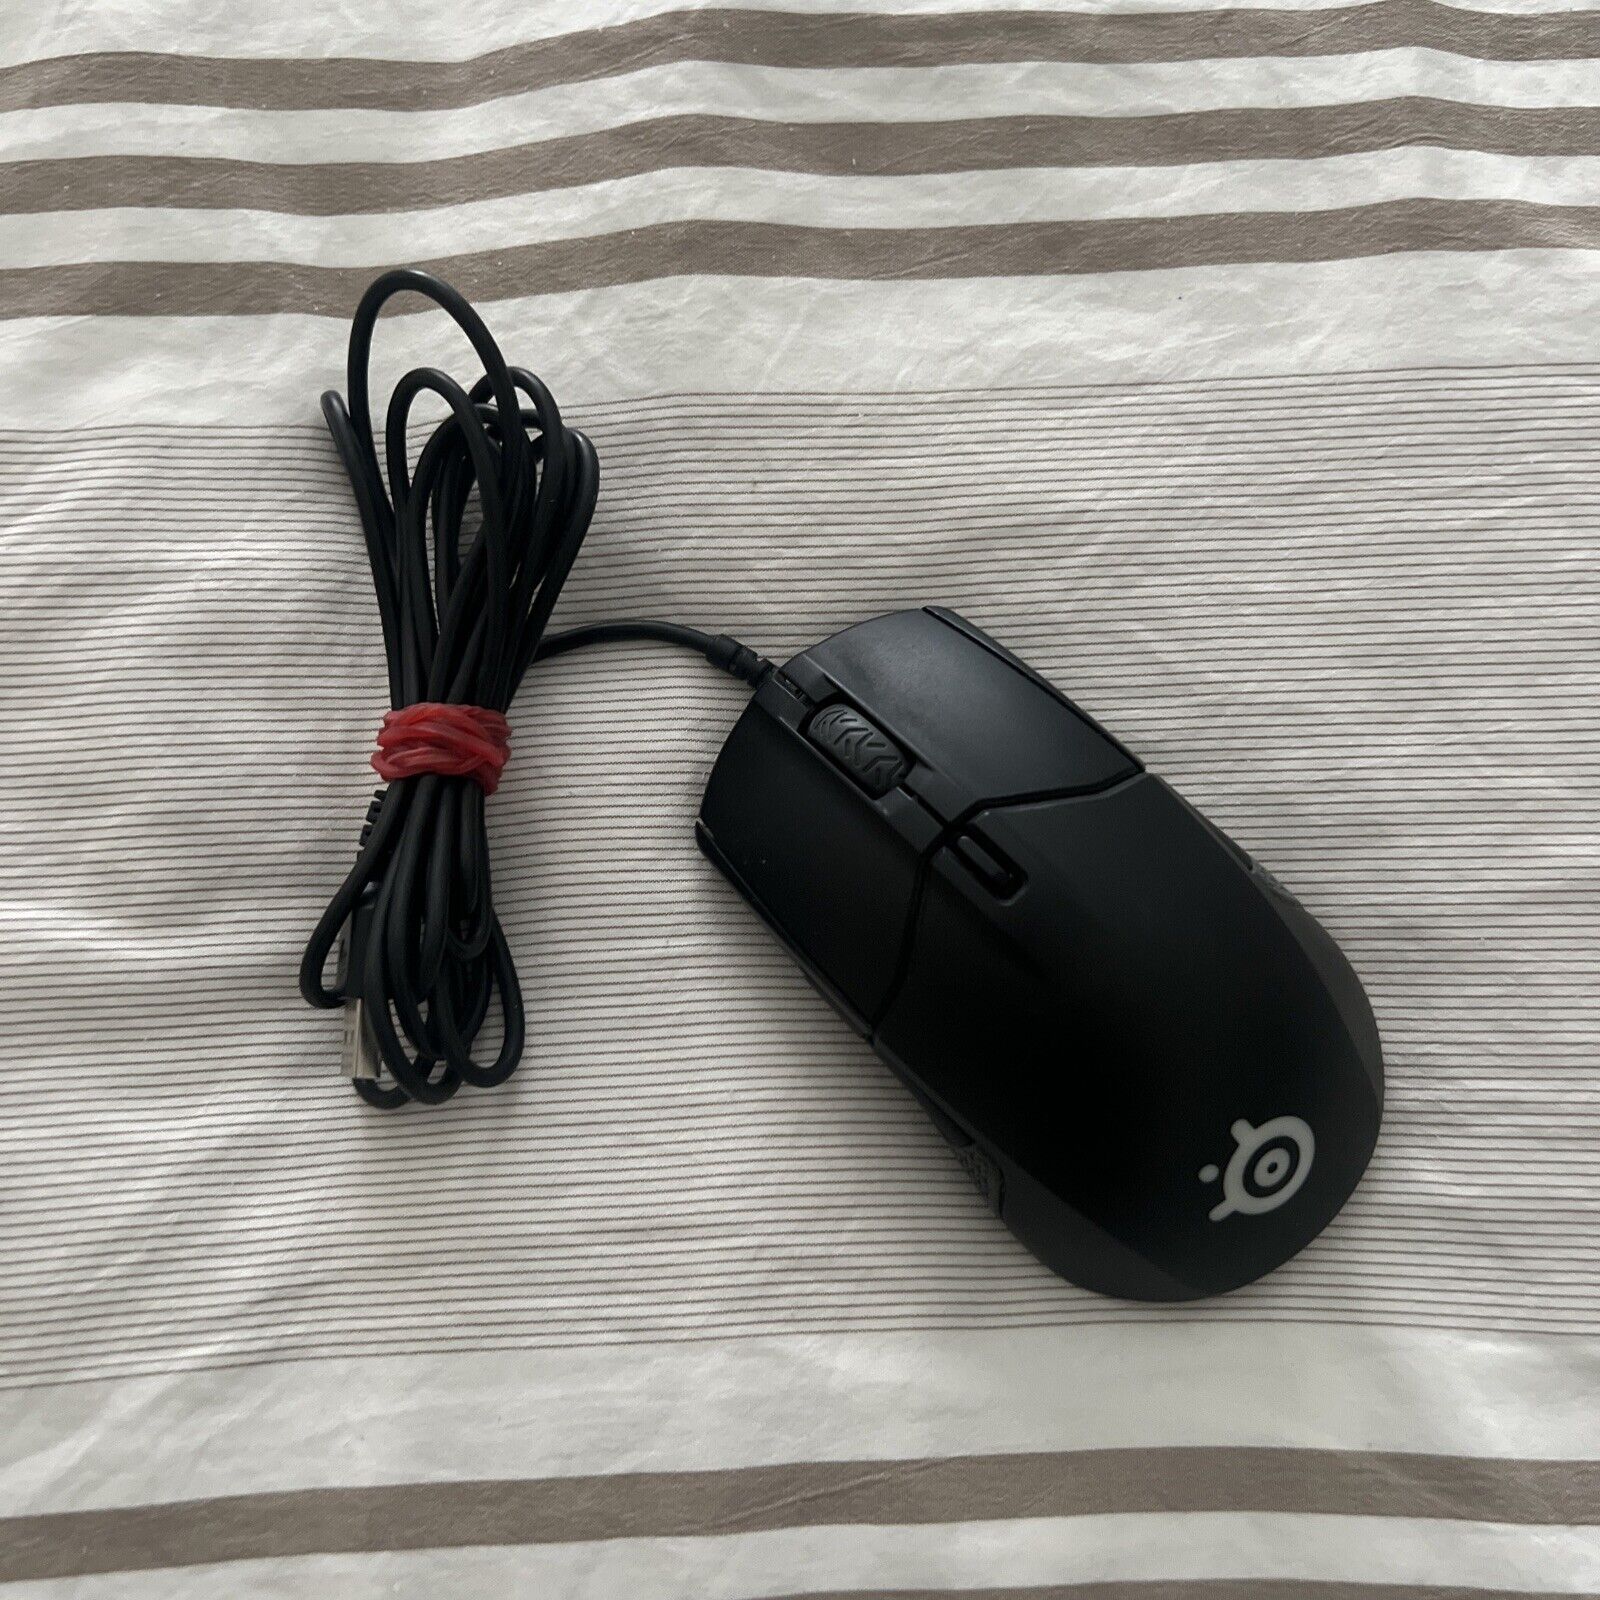 SteelSeries Sensei 310 Ambidextrous Esports Gaming Mouse - Barely Used